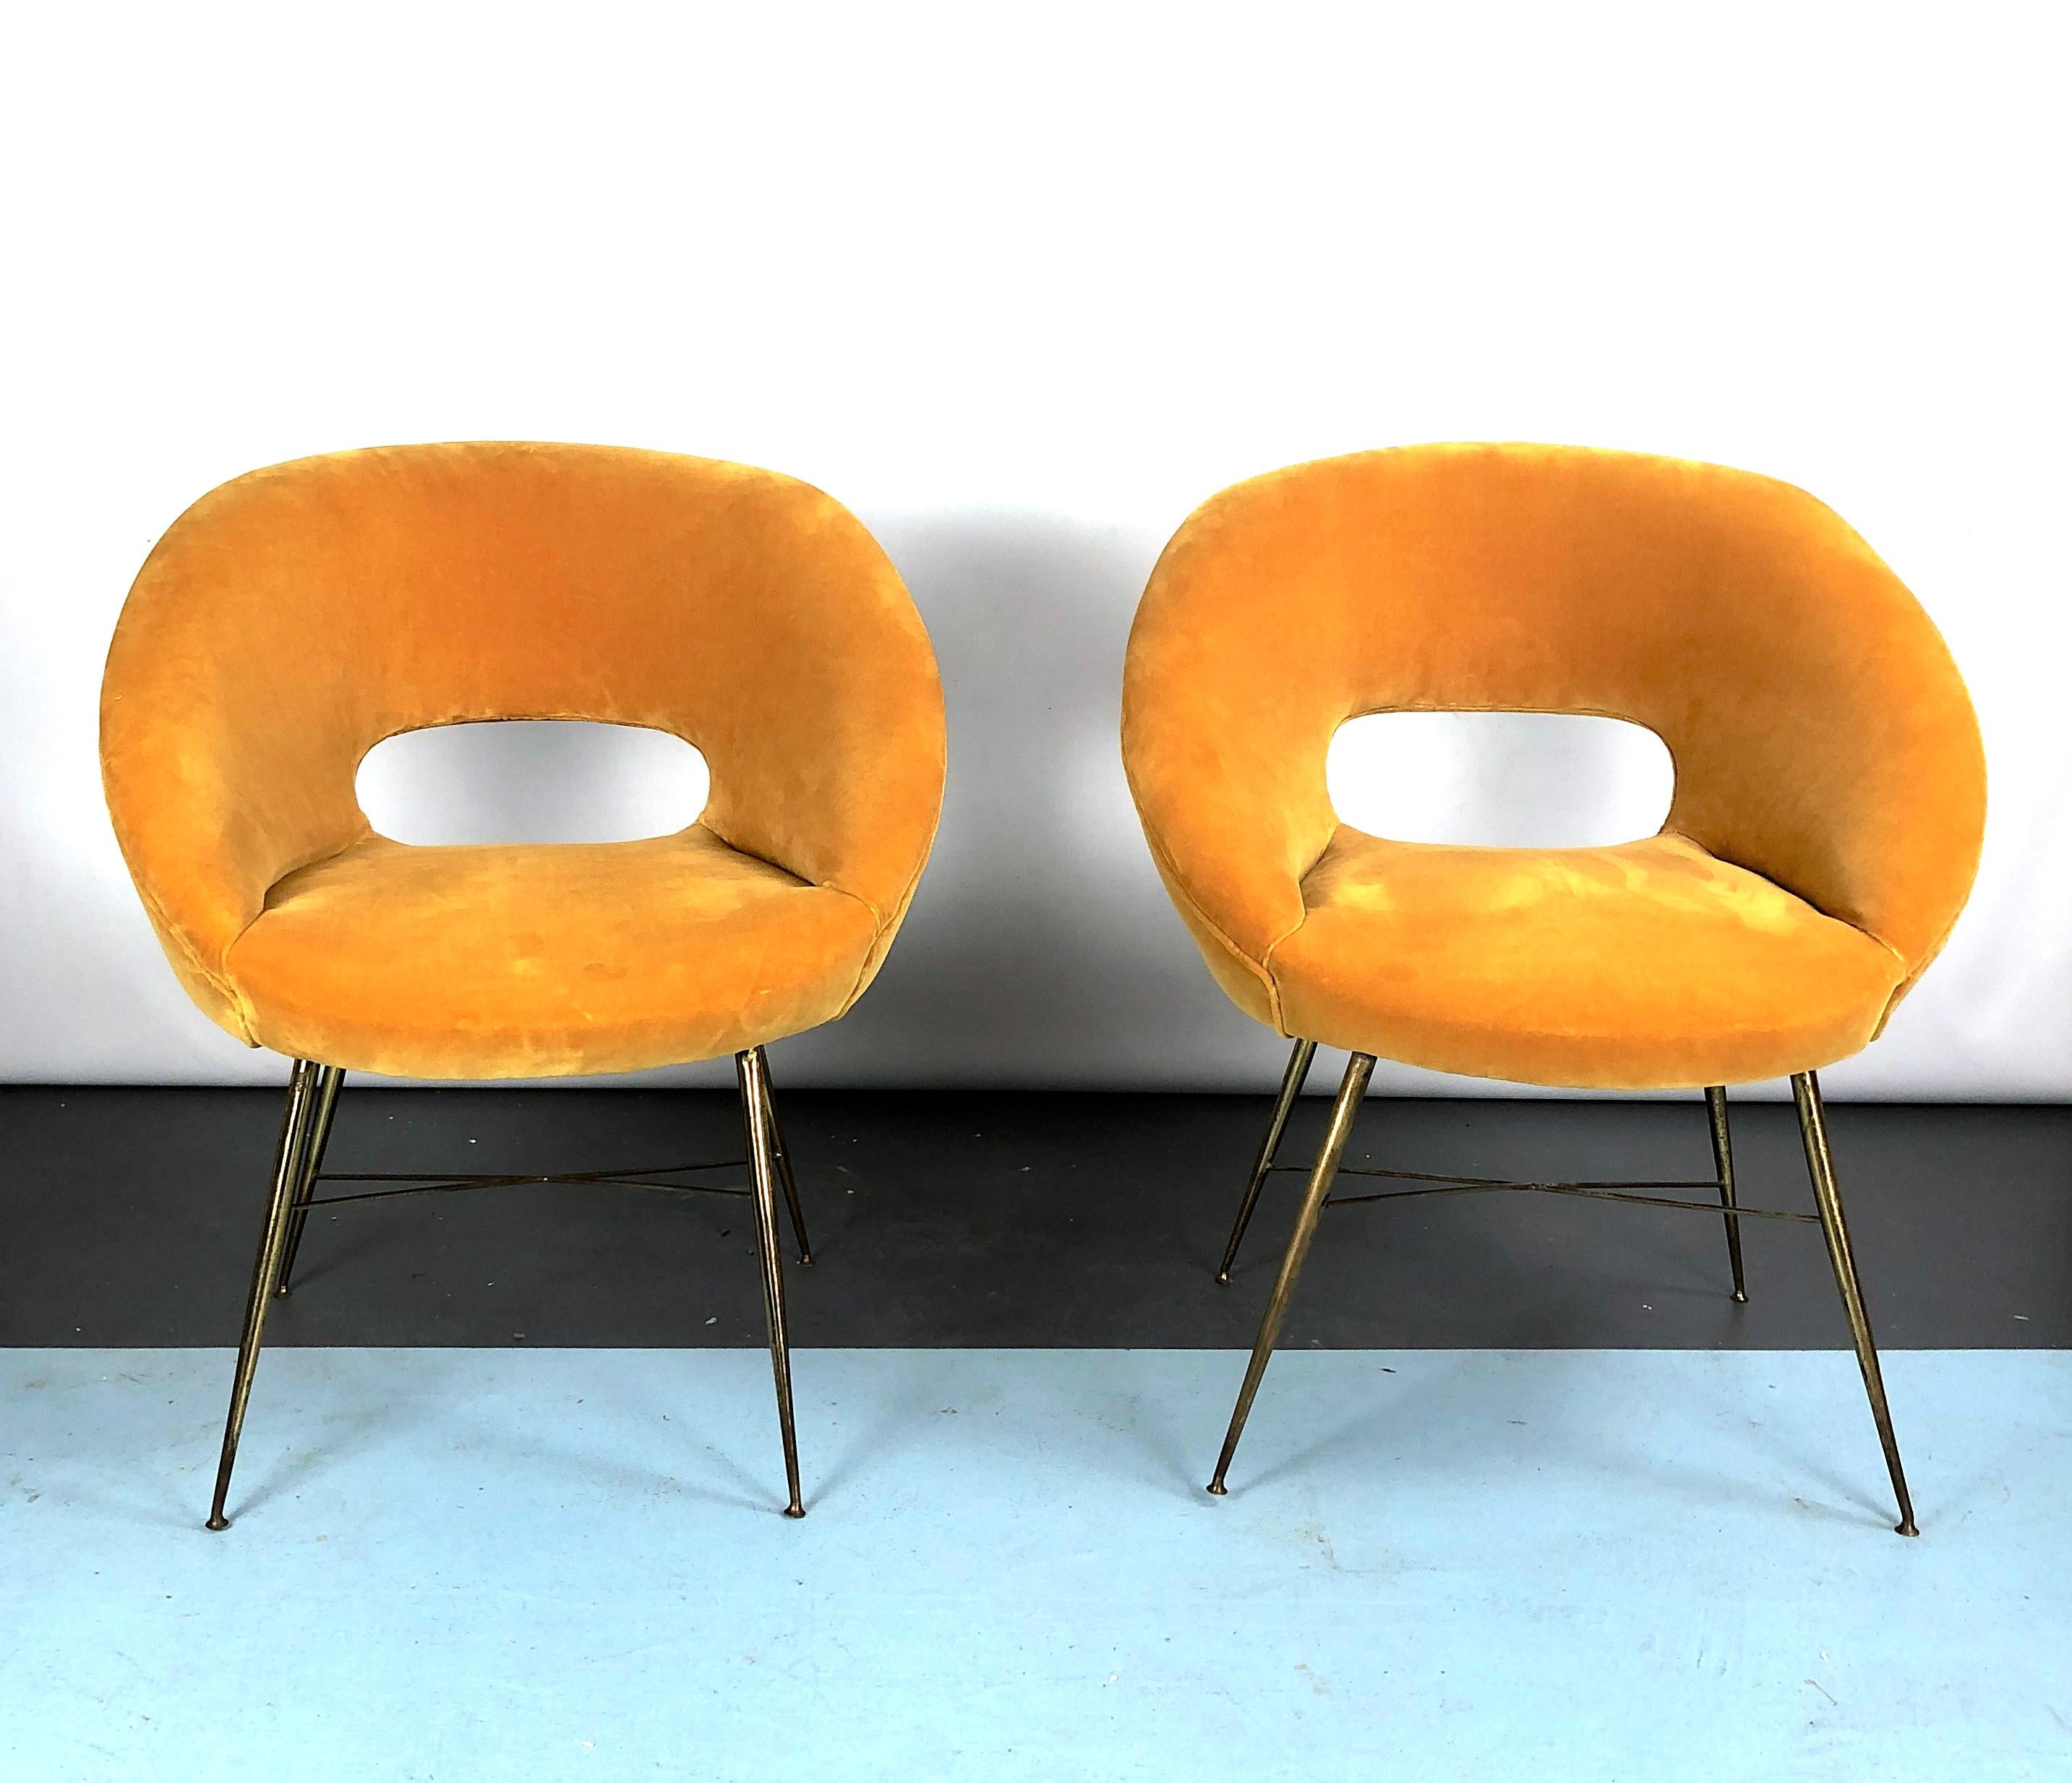 Very good condition for this set of two Italian armchairs designed by Silvio Cavatorta and produced during the 50s. Upholstered with gold cotton velvet. Patina and trace of age and use on the brass legs.